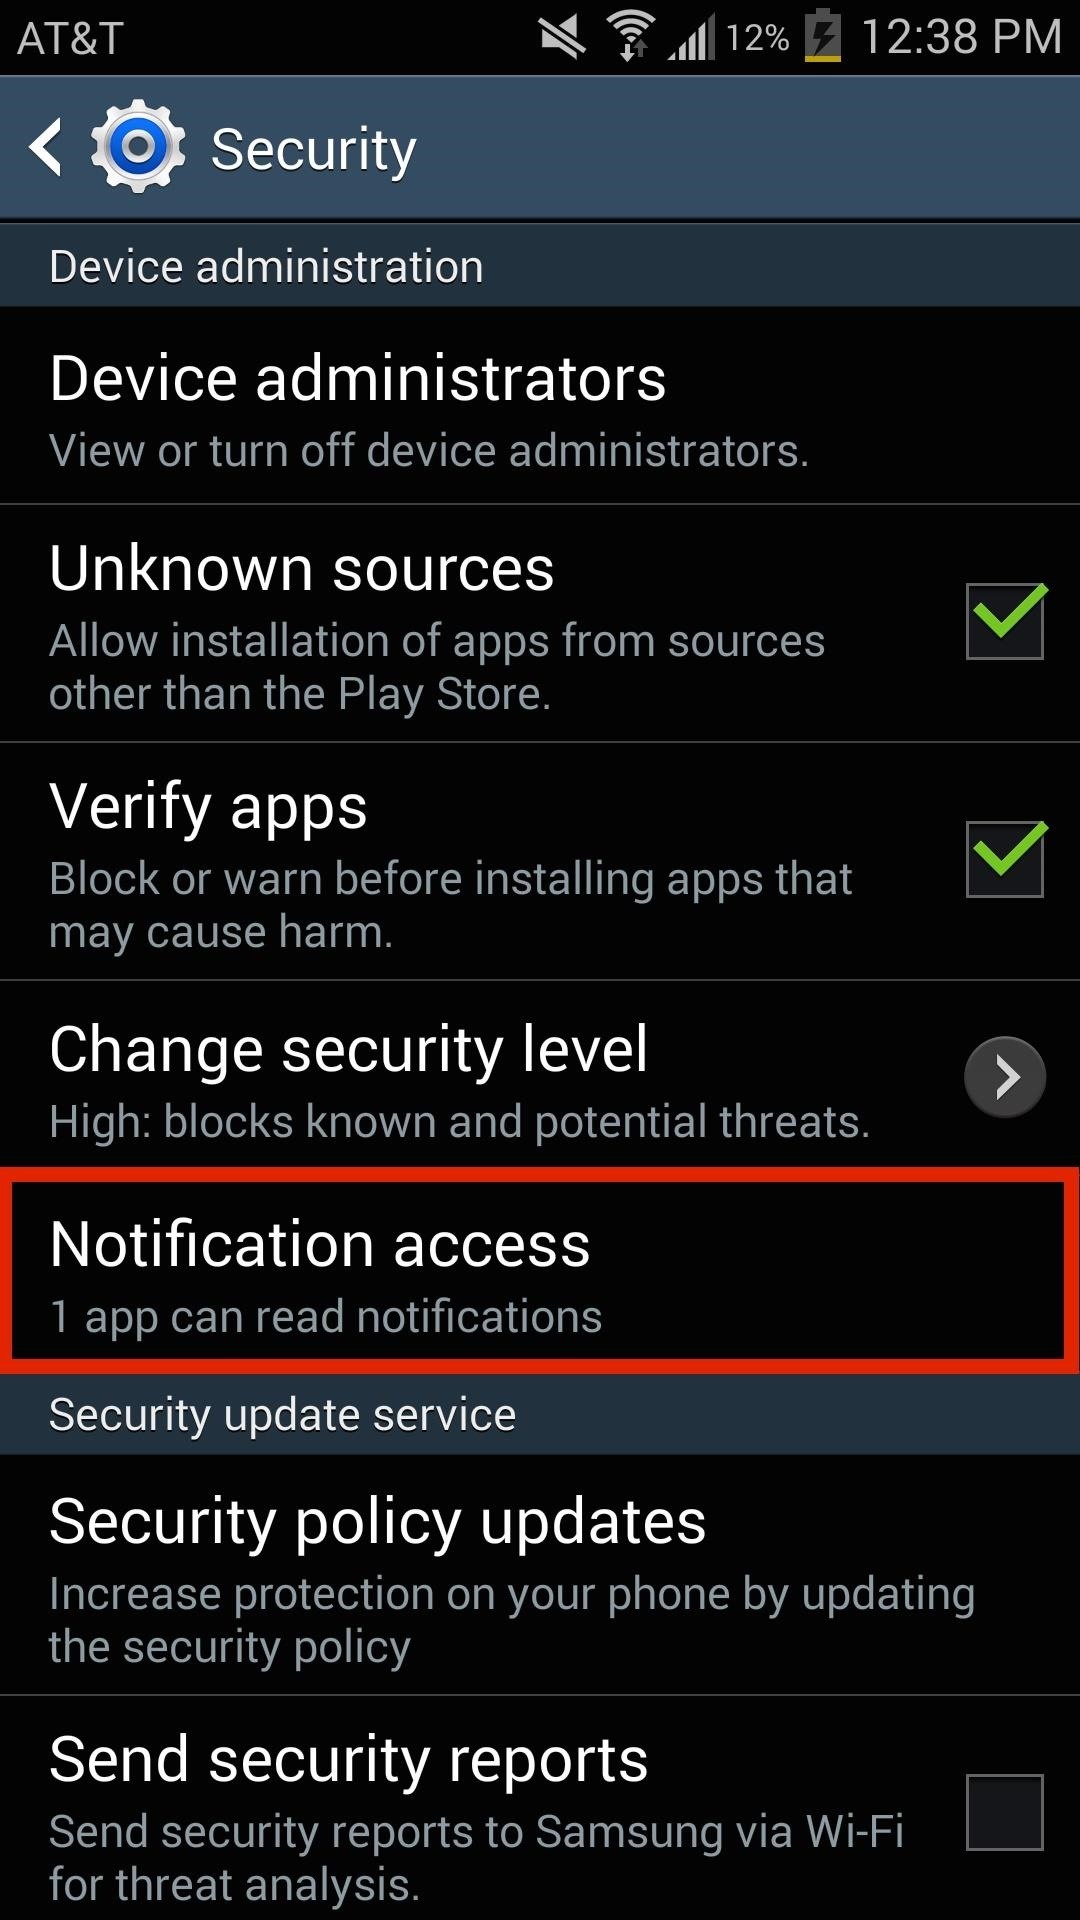 How to Get the Android L Lock Screen on Your Galaxy S4 or Other Android Device